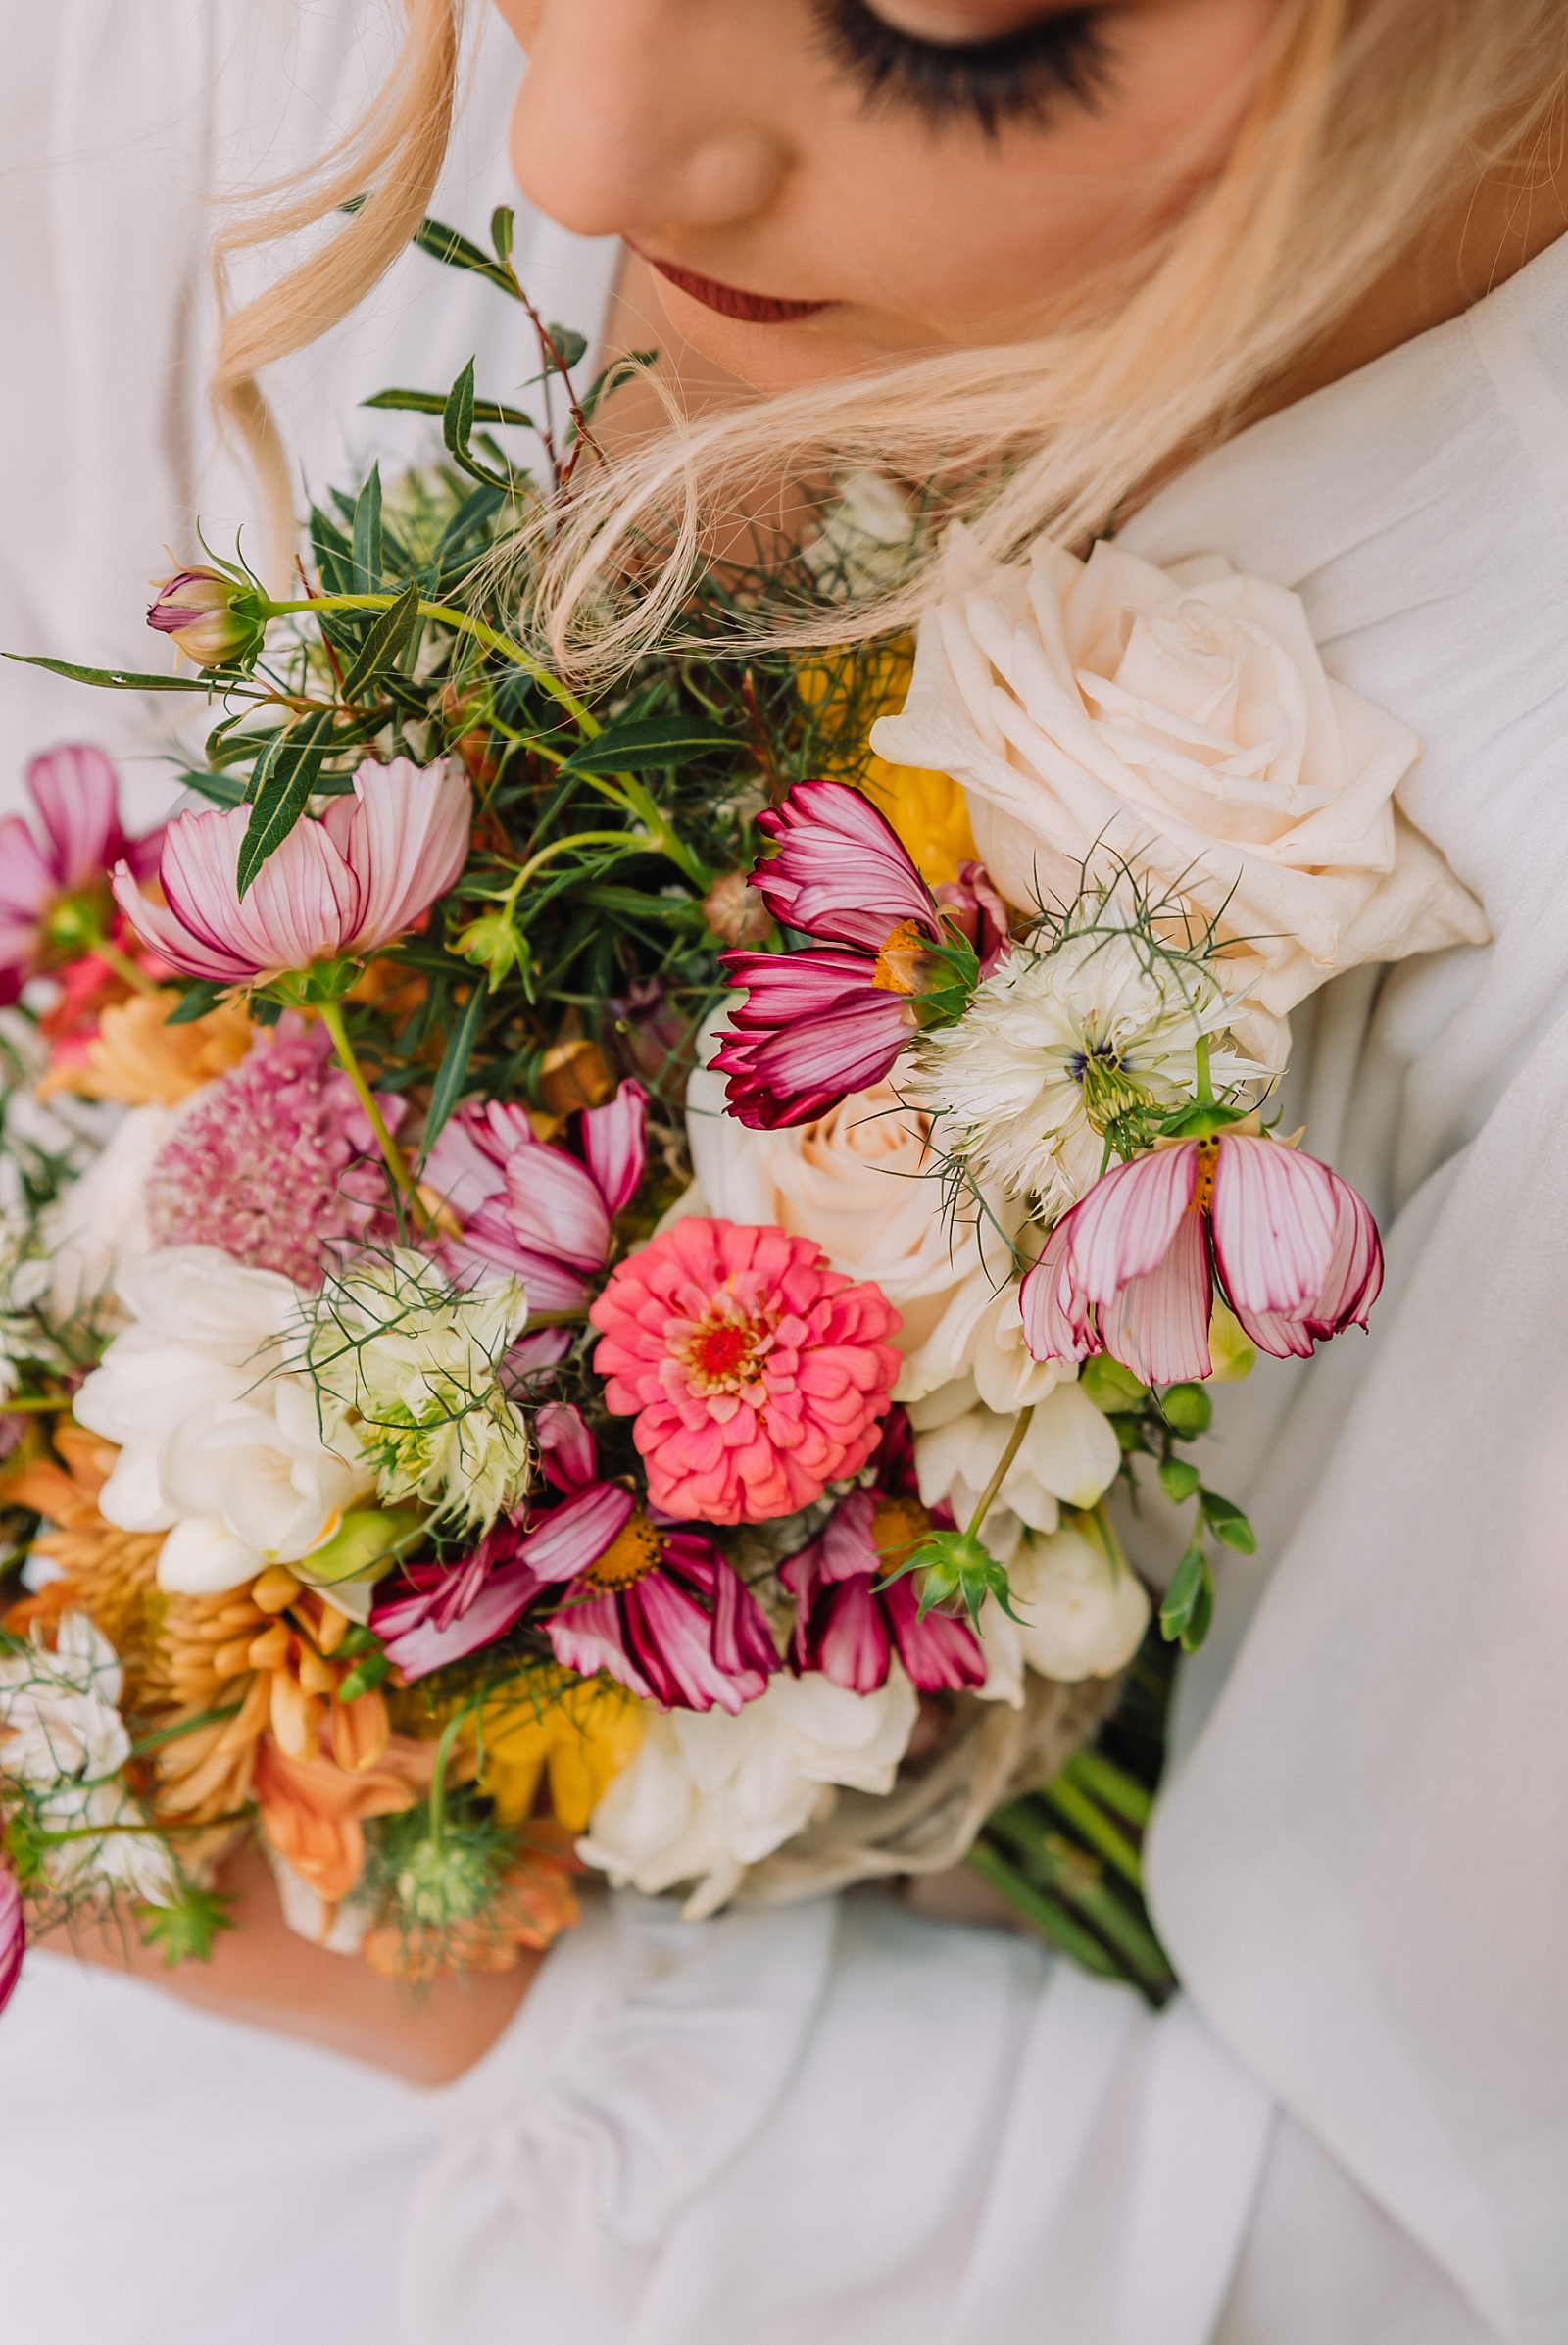 bouquet filled with pinks, white, and green florals for spring florals